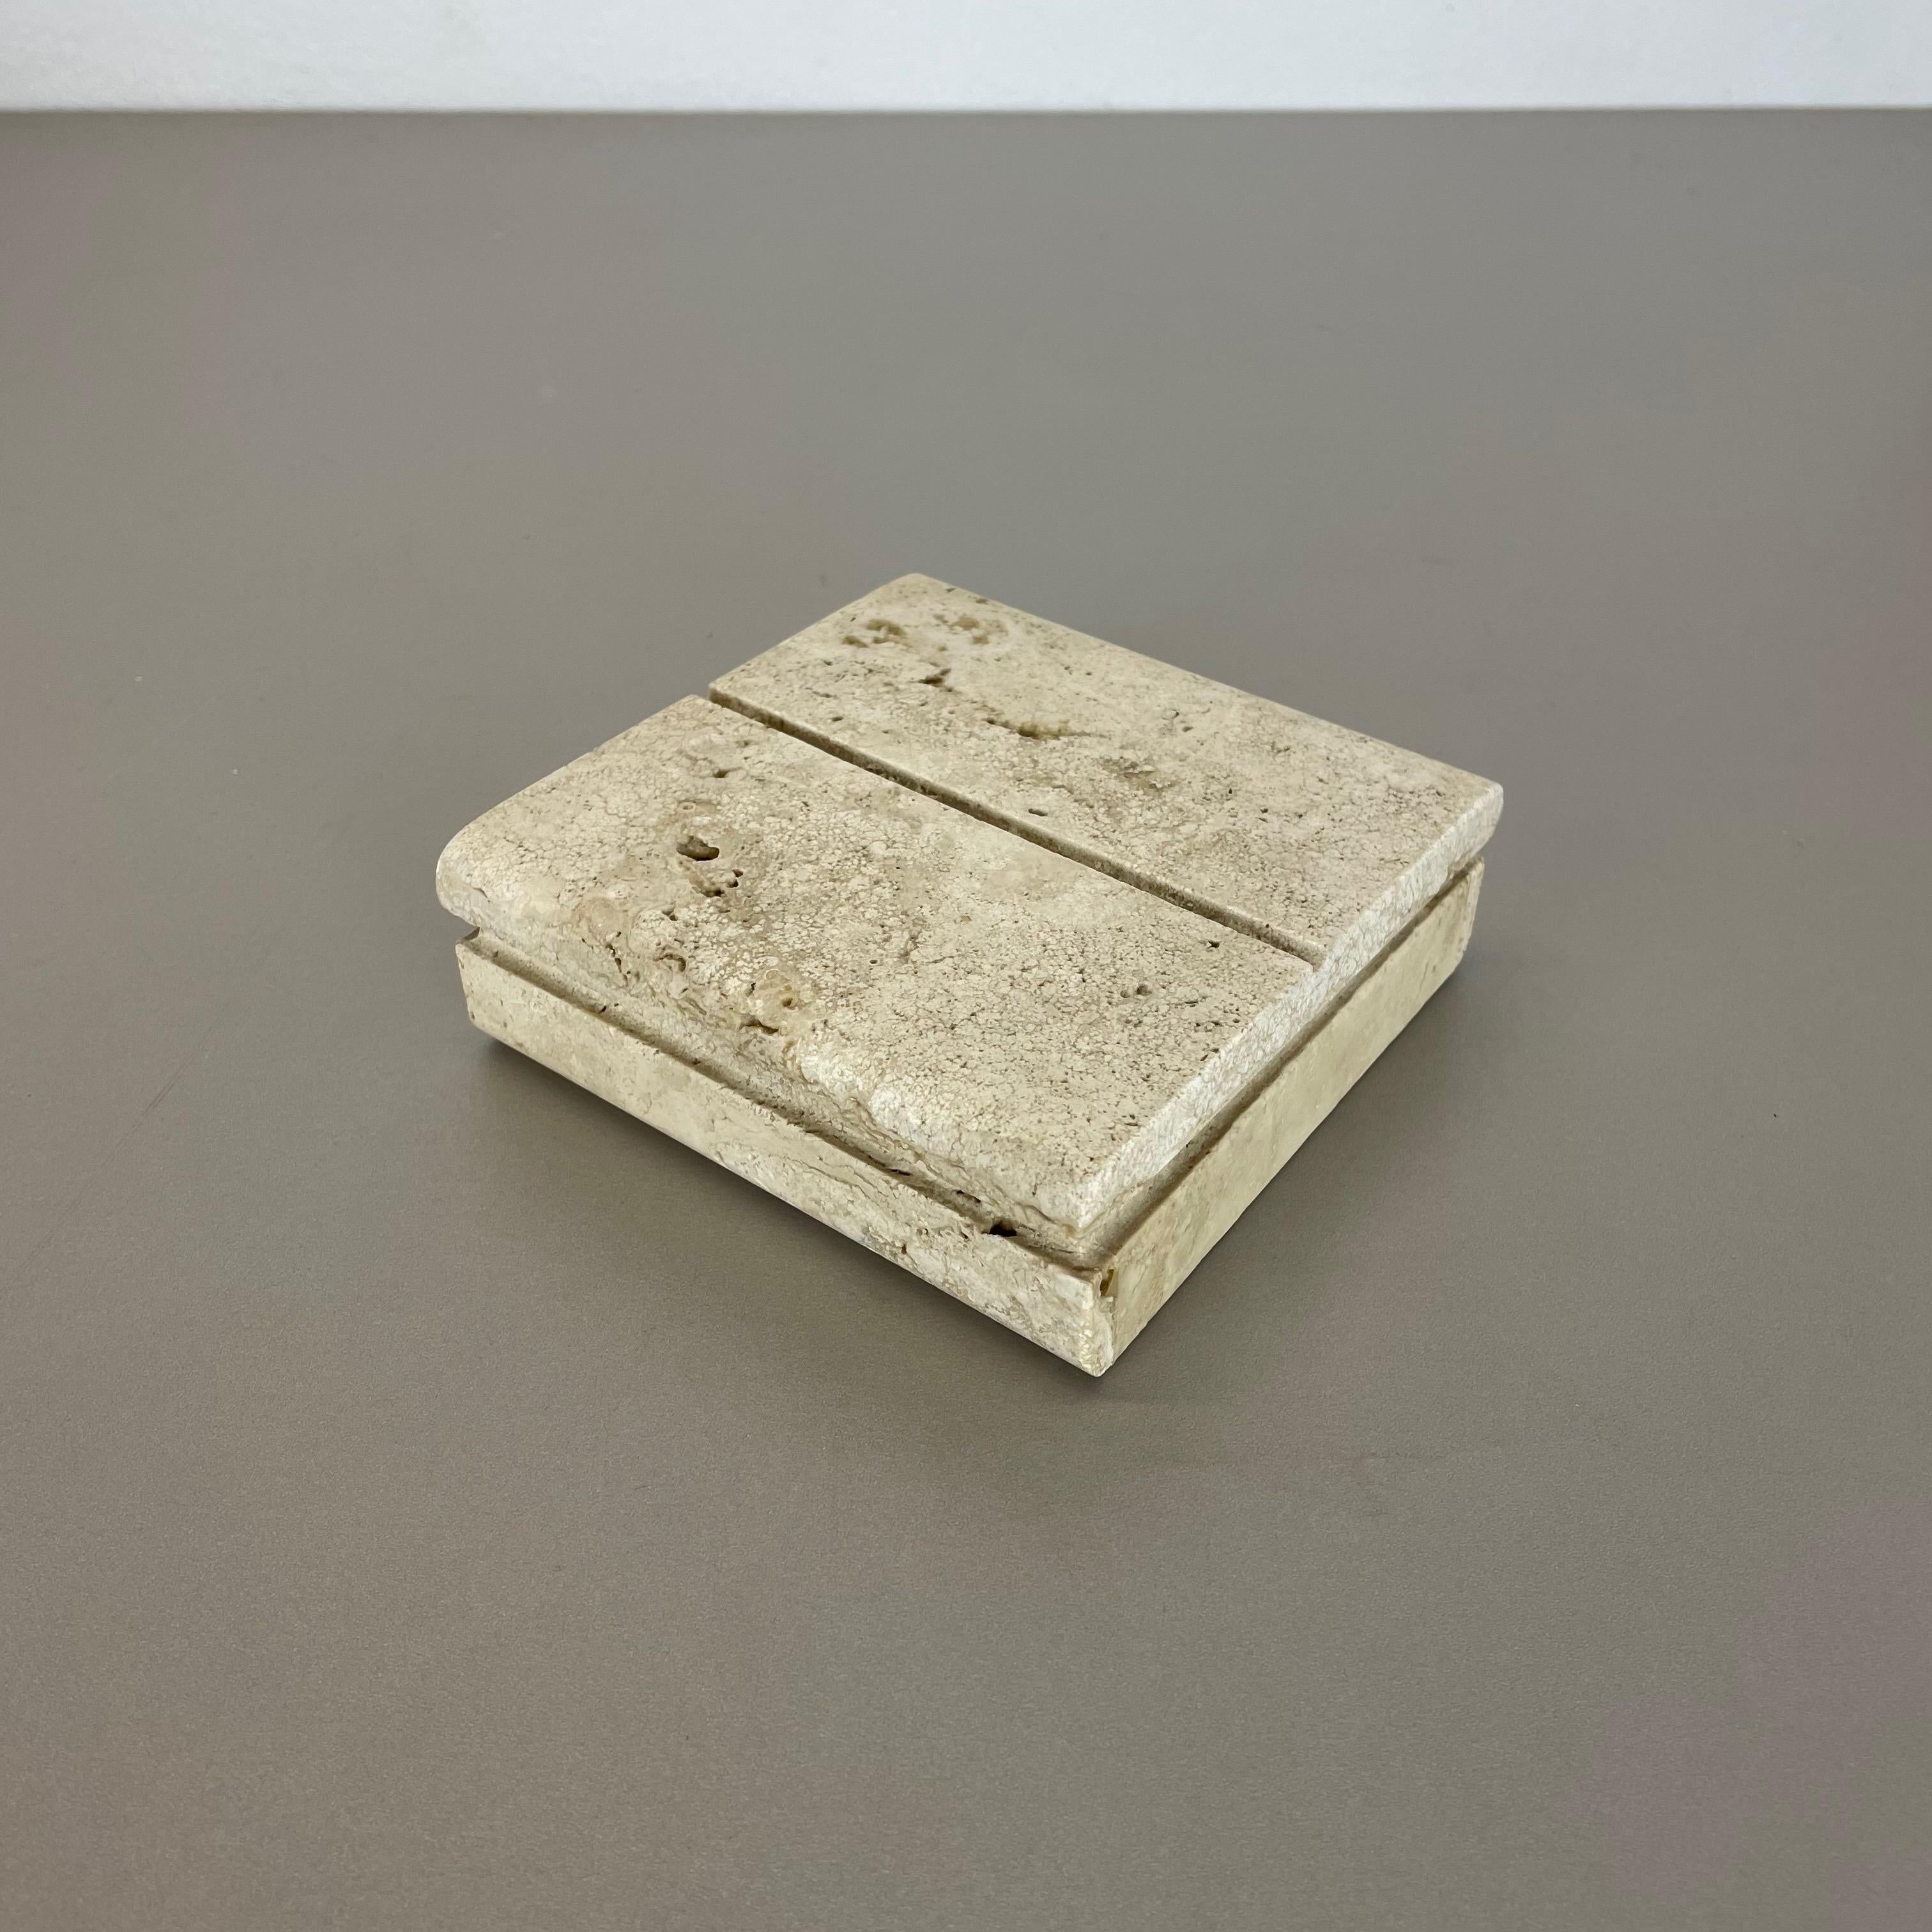 Article:

Travertine stroge box storage box


Designer:

Fratelli Manelli


Decade:

1970s


This original vintage storage object was designed and produced by Fratelli Manelli in Italy in the 1970s. this element is made of solid